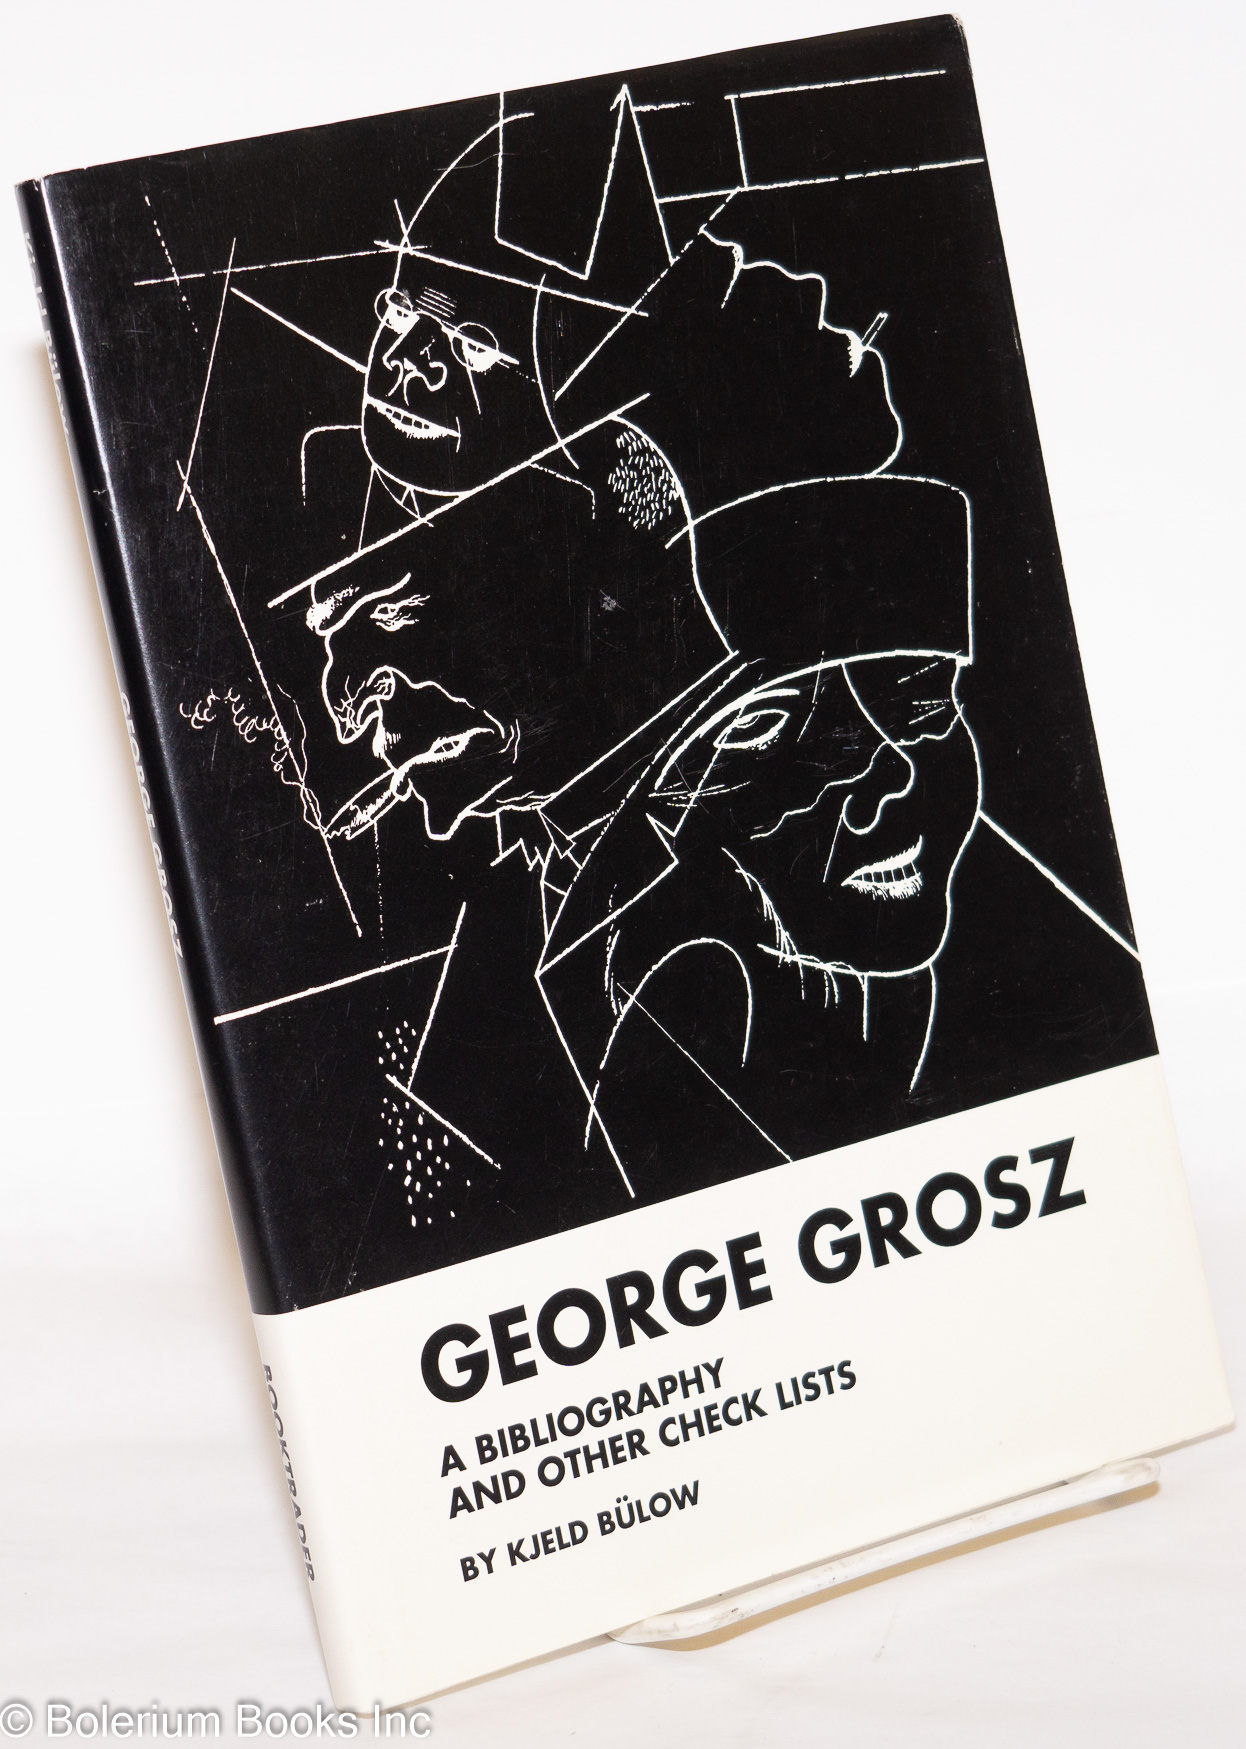 George Grosz, a Bibliography and Other Check Lists - Bülow, Kjeld, introduction by Robert Cenedella